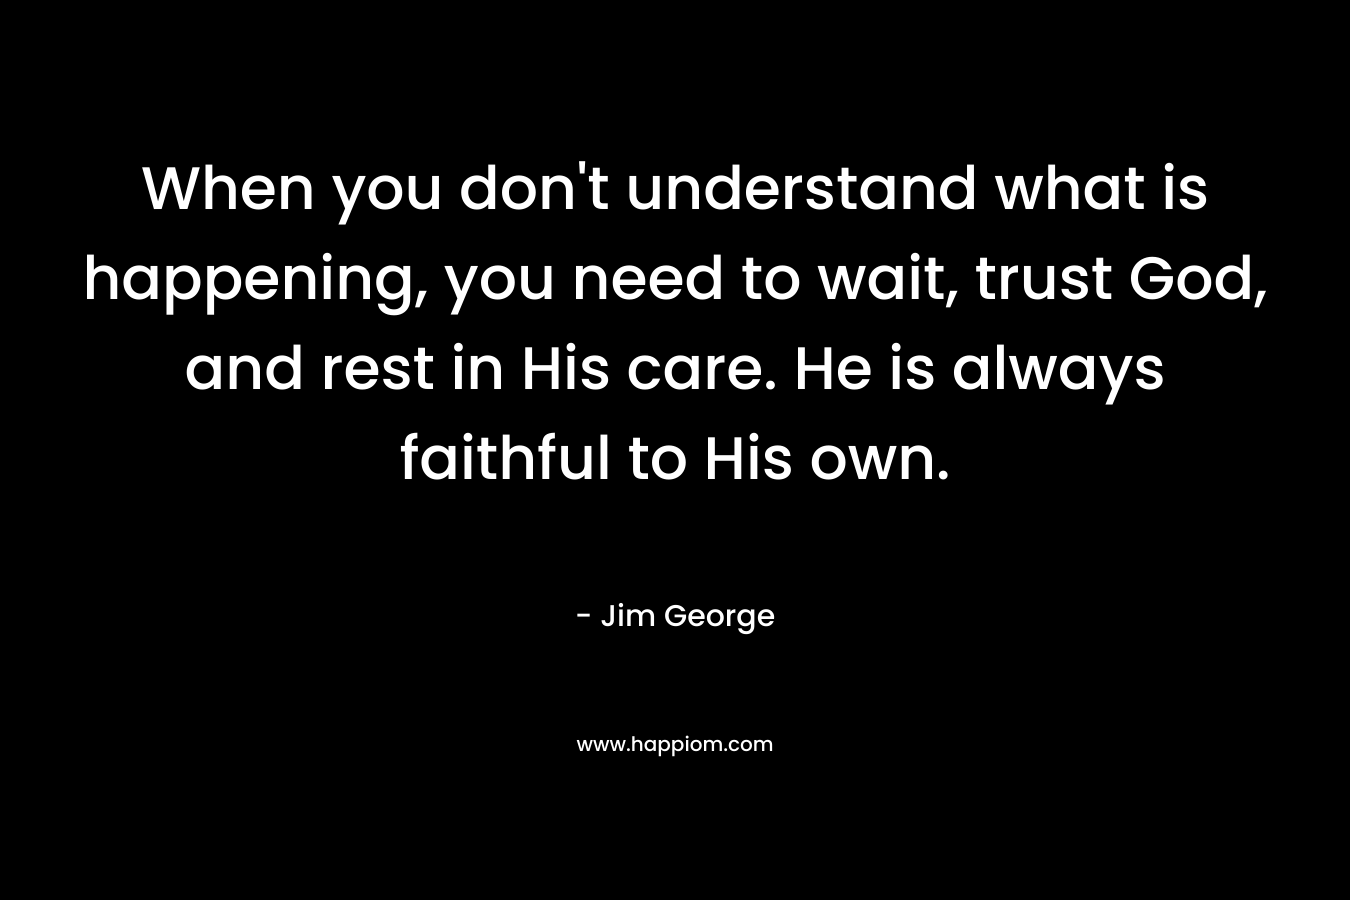 When you don't understand what is happening, you need to wait, trust God, and rest in His care. He is always faithful to His own.